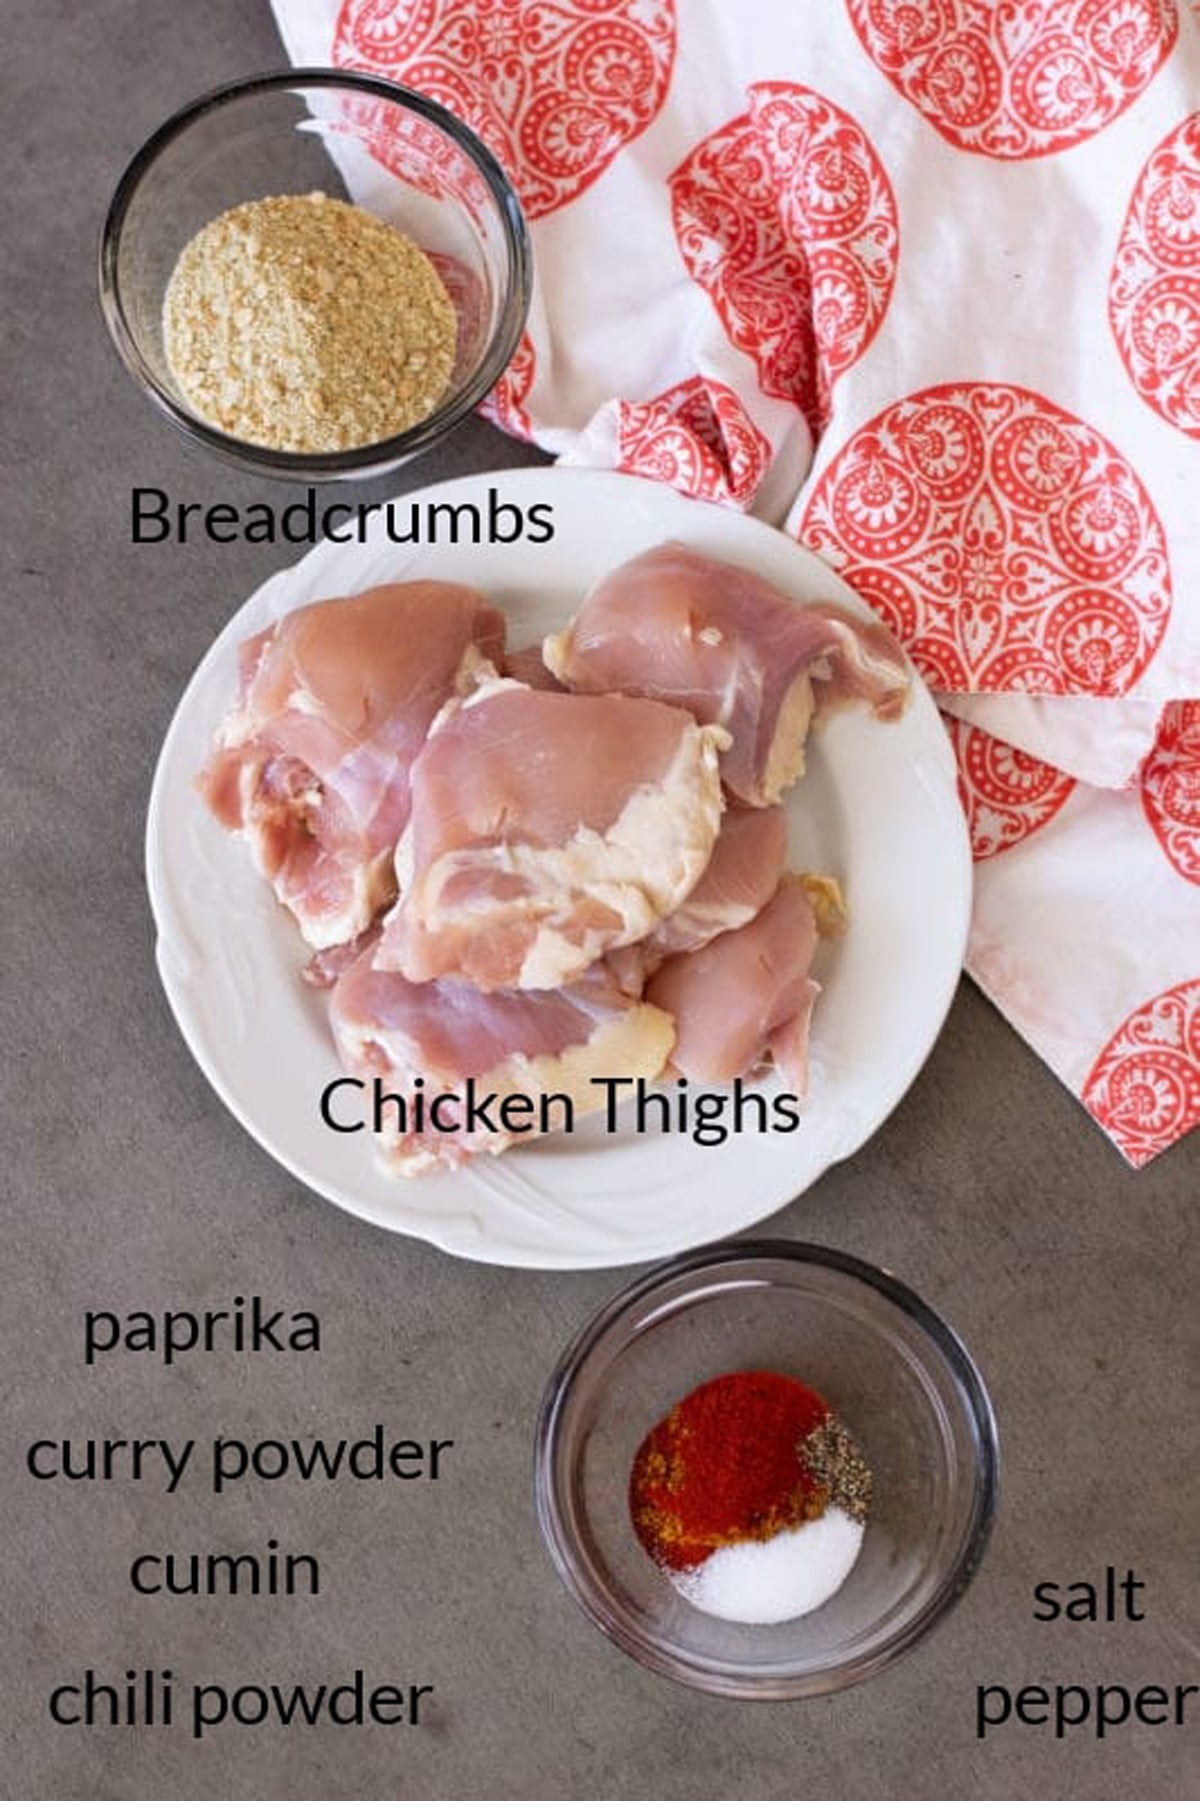 Ingredients including chicken, breadcrumbs, and spices on a counter.